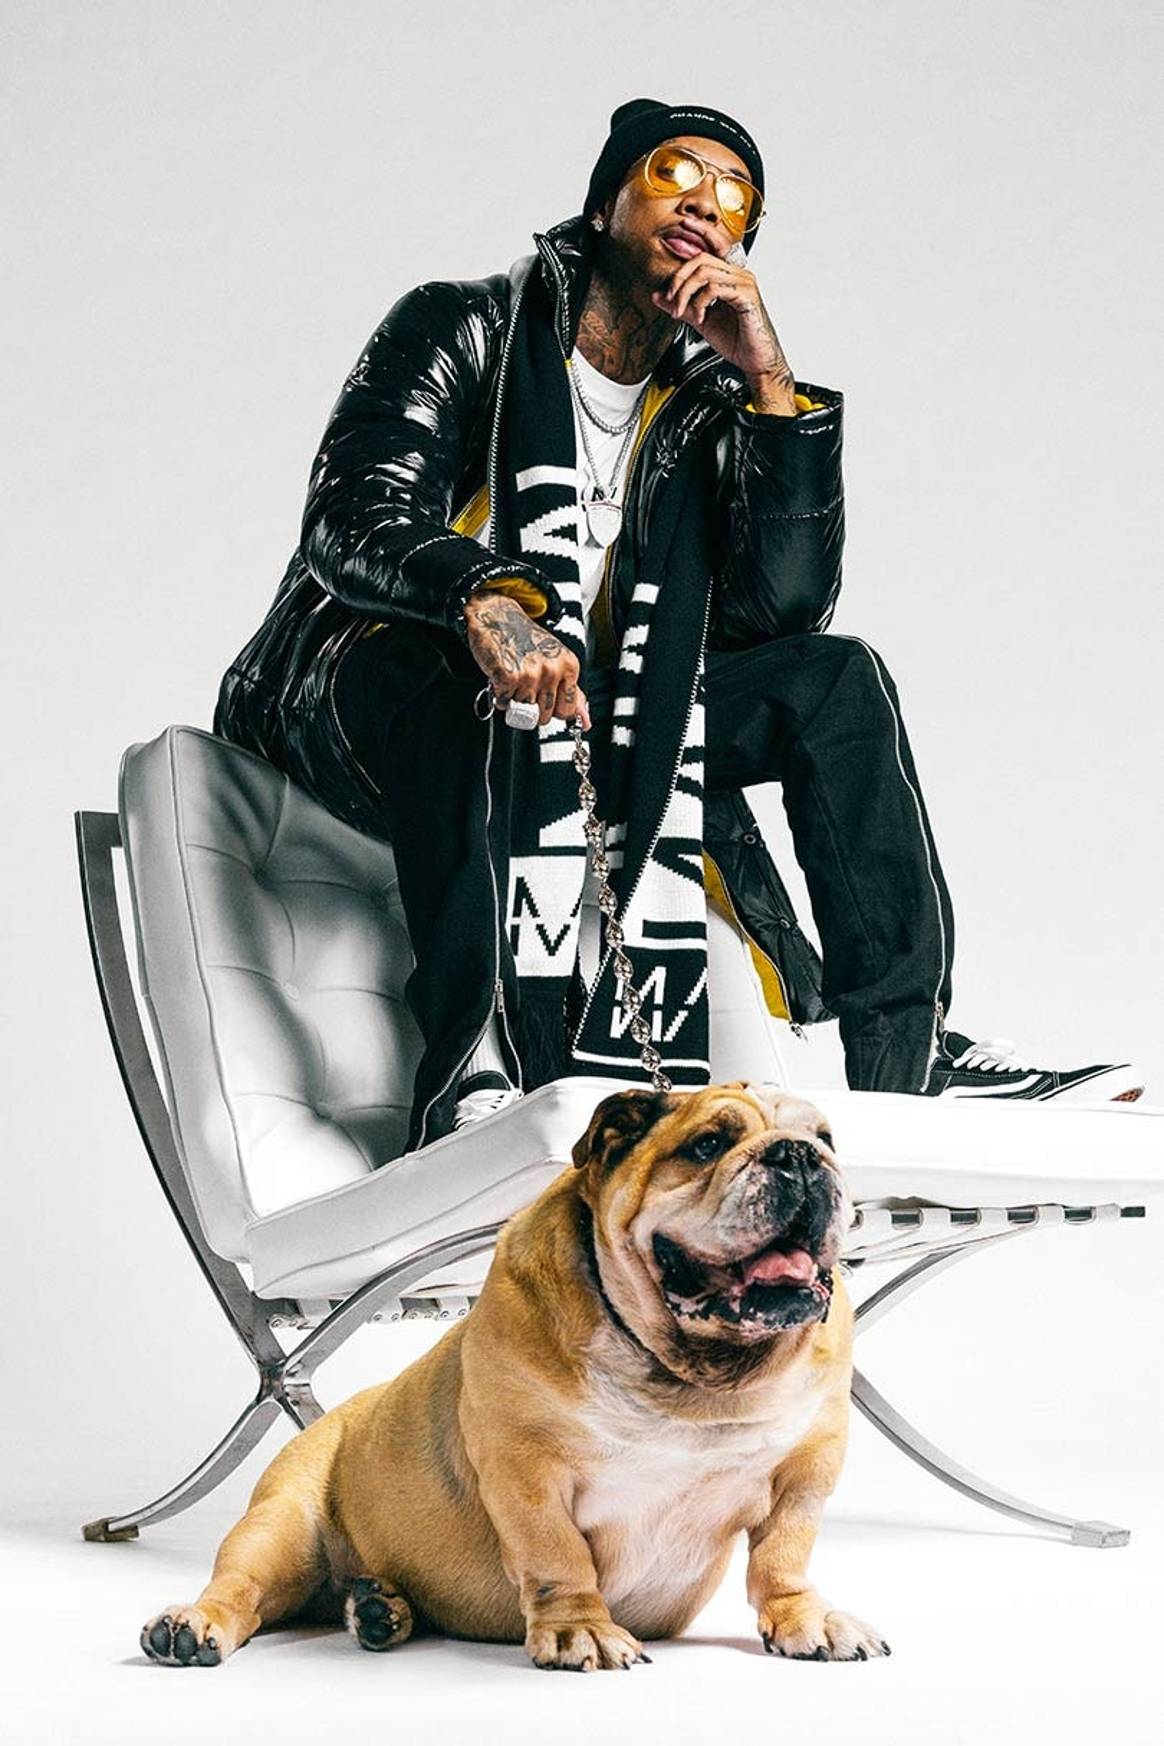 In Pictures: BoohooMan x Tyga collection